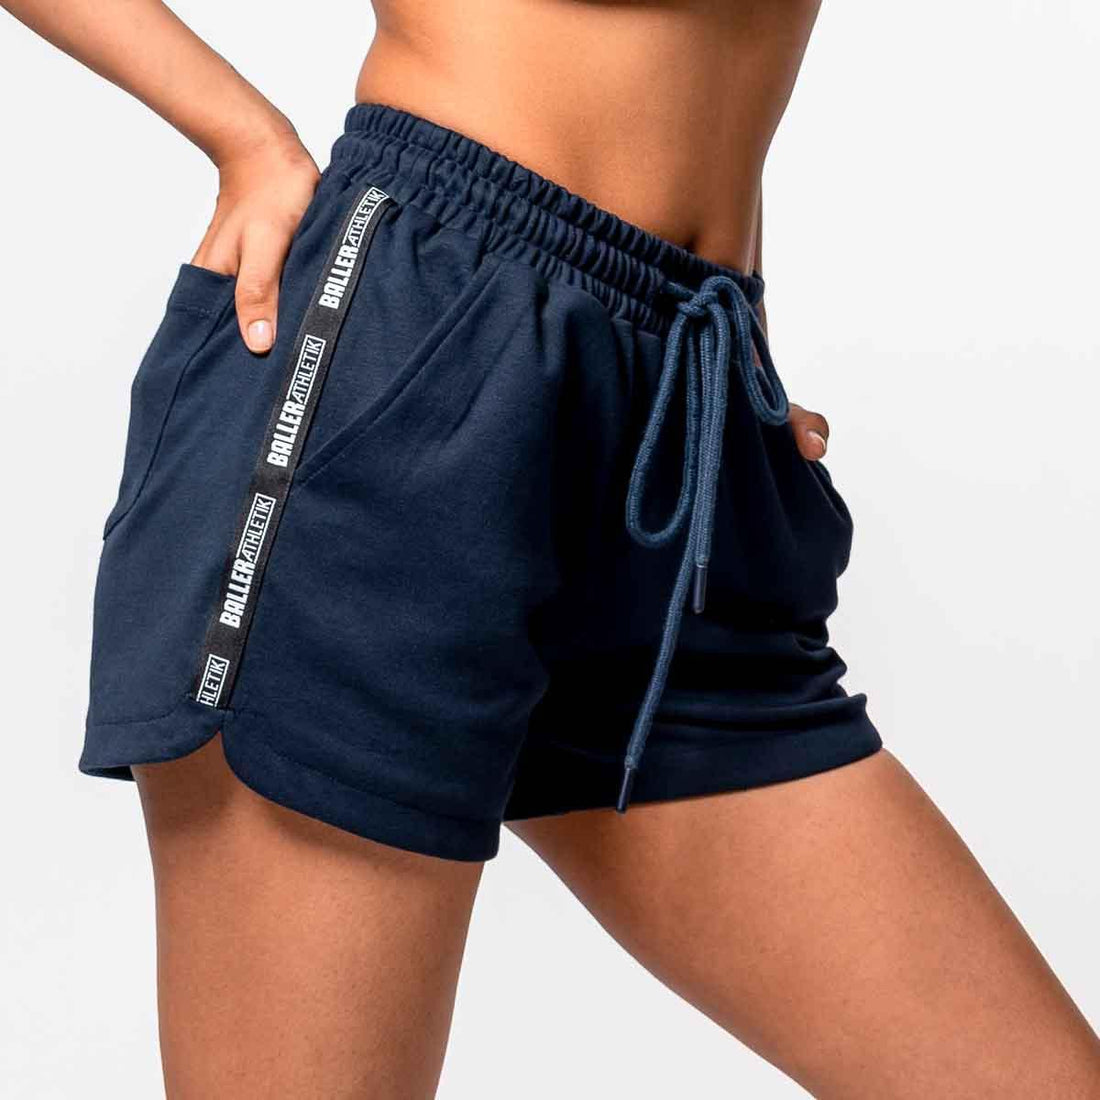 Navy Blue - So Chill Shorts for Women